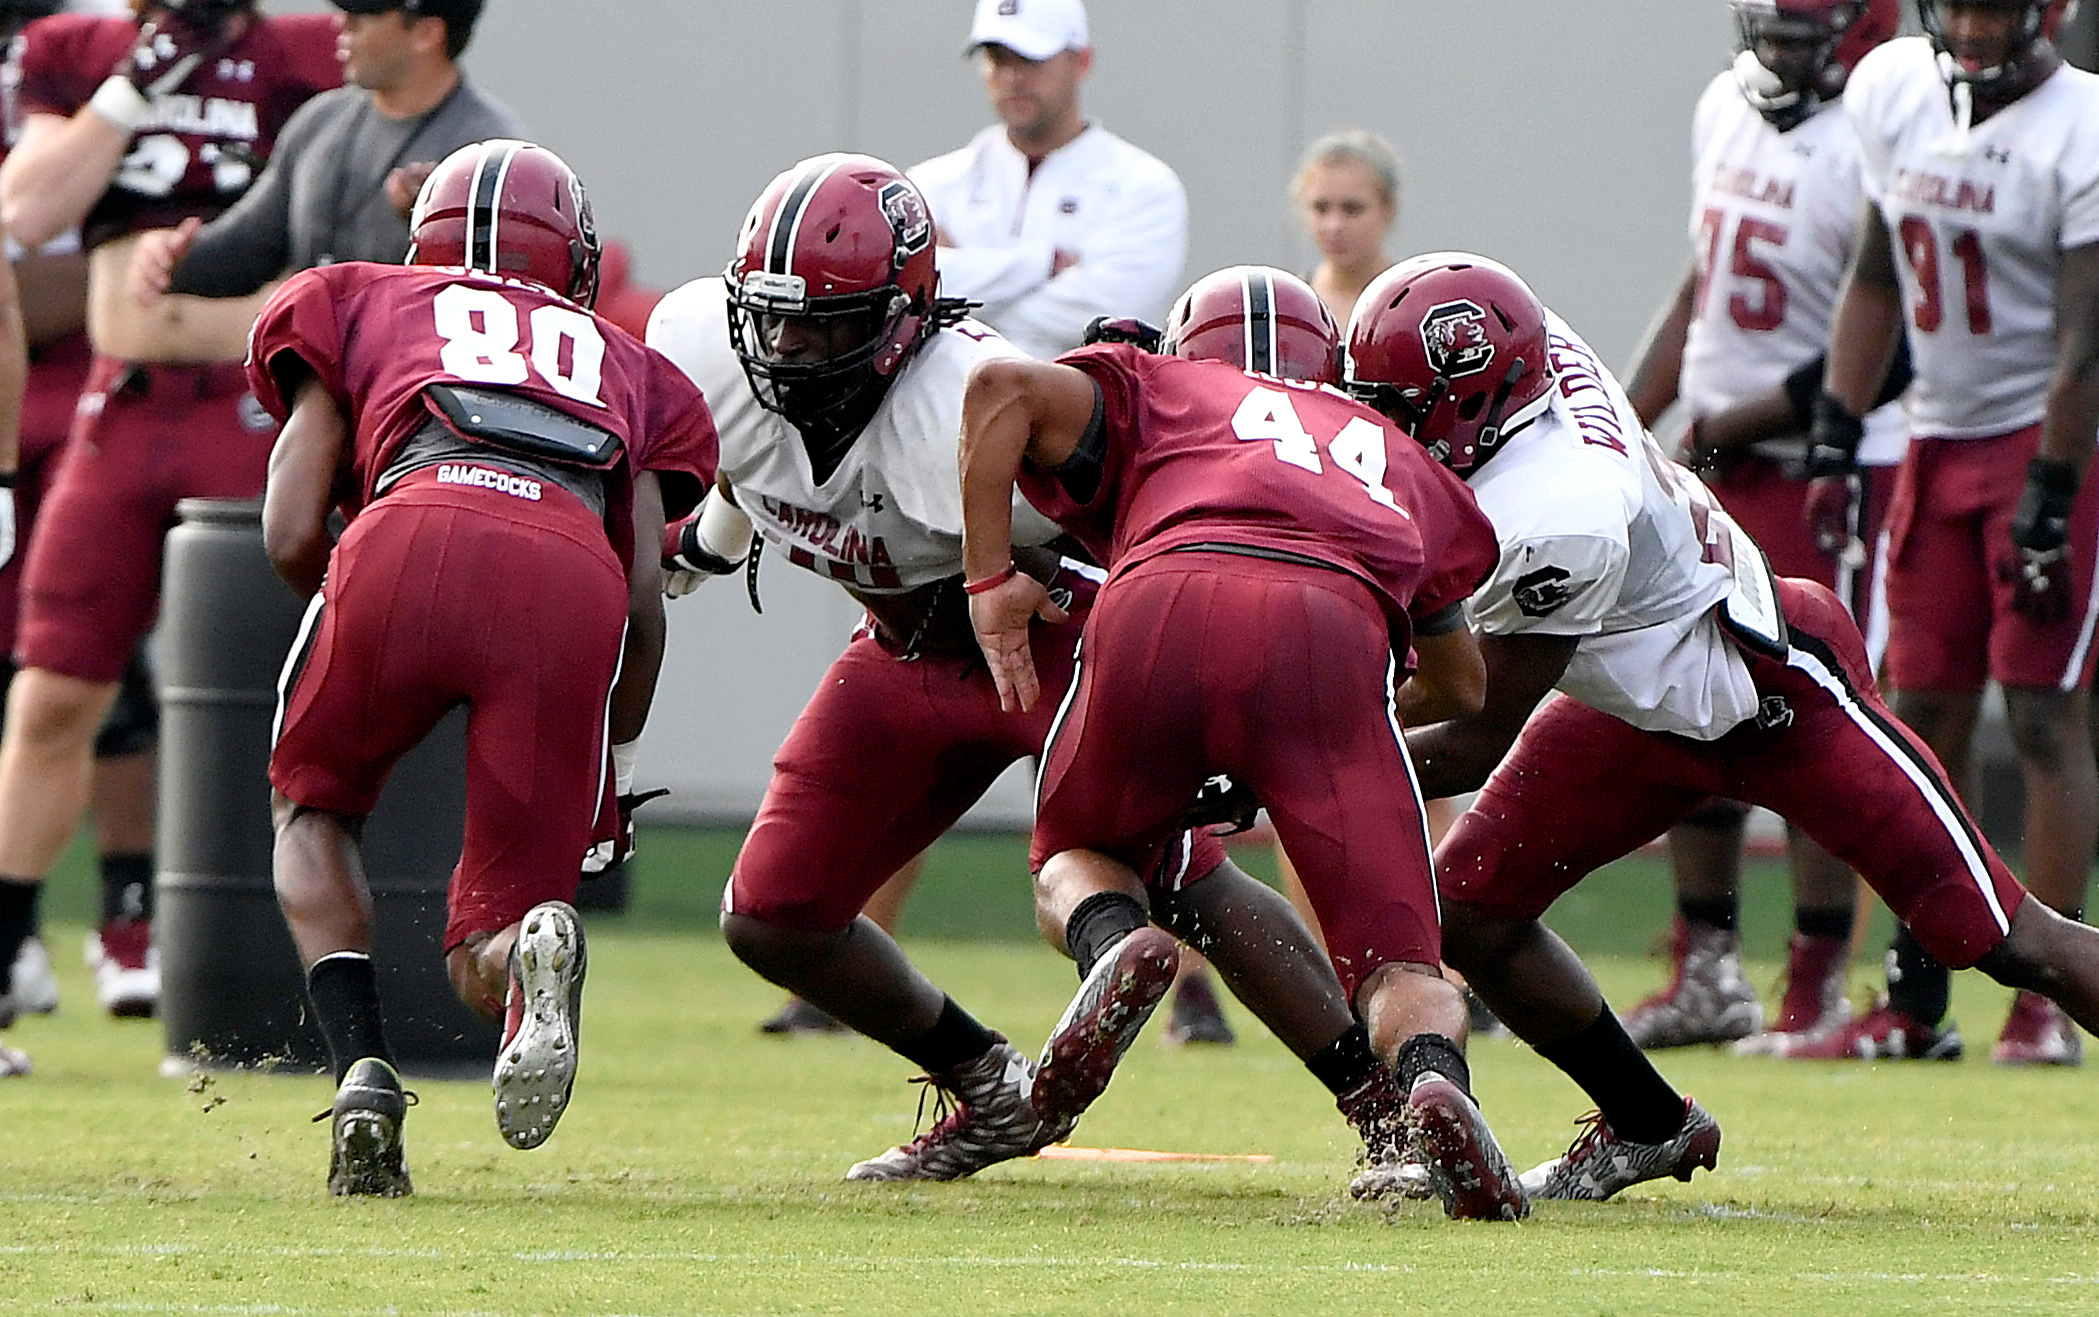 South Carolina Practices In Full Pads For First Time This Season